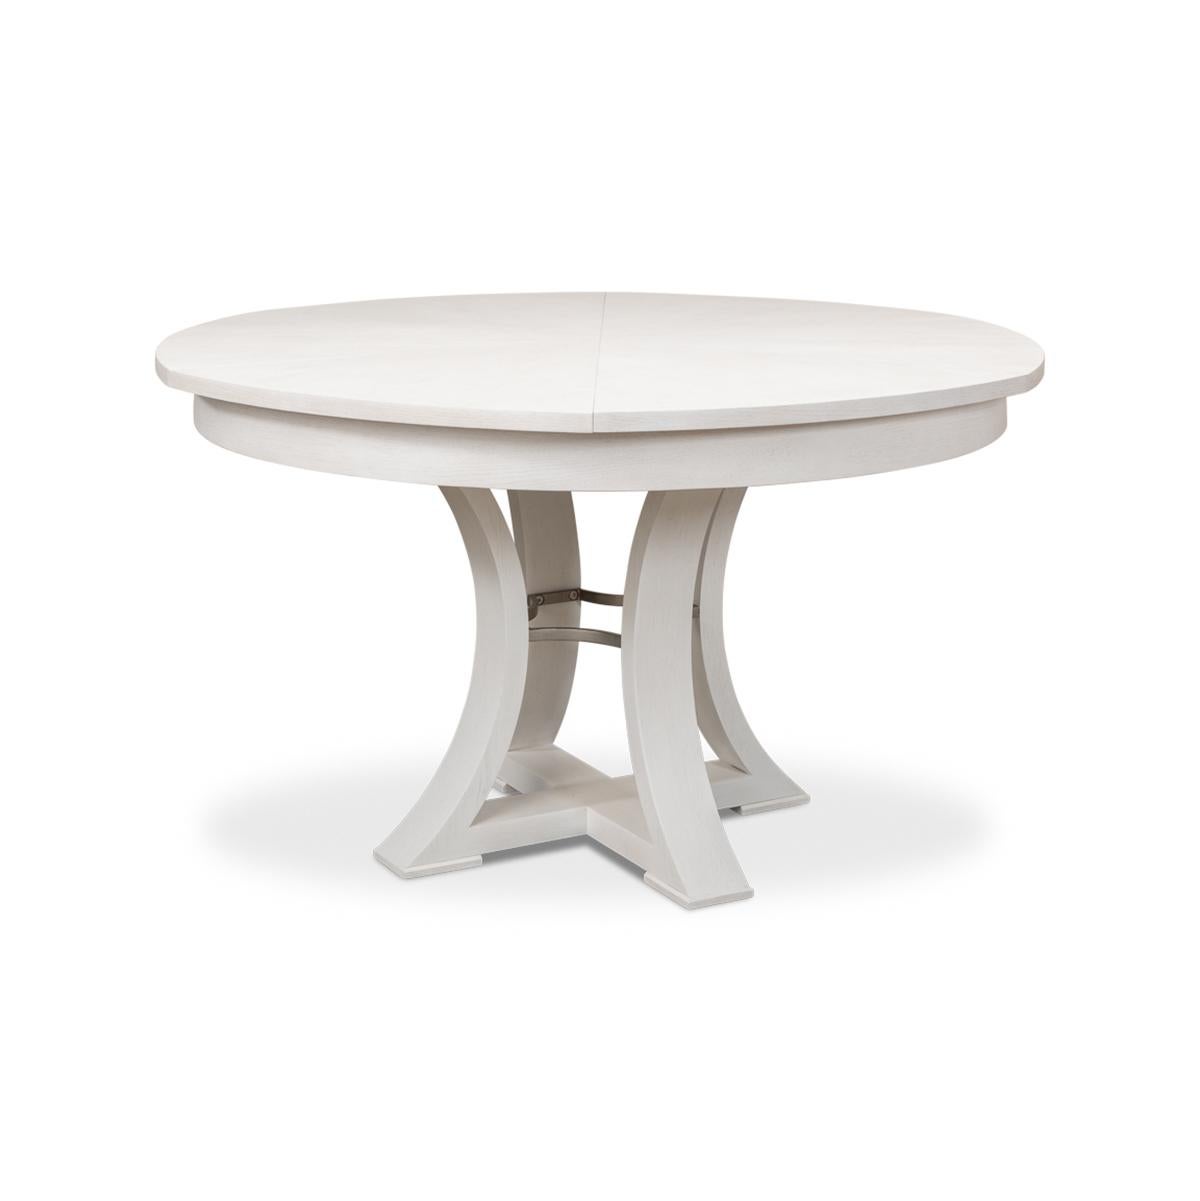 Contemporary Modern White Dining Table - 70 For Sale